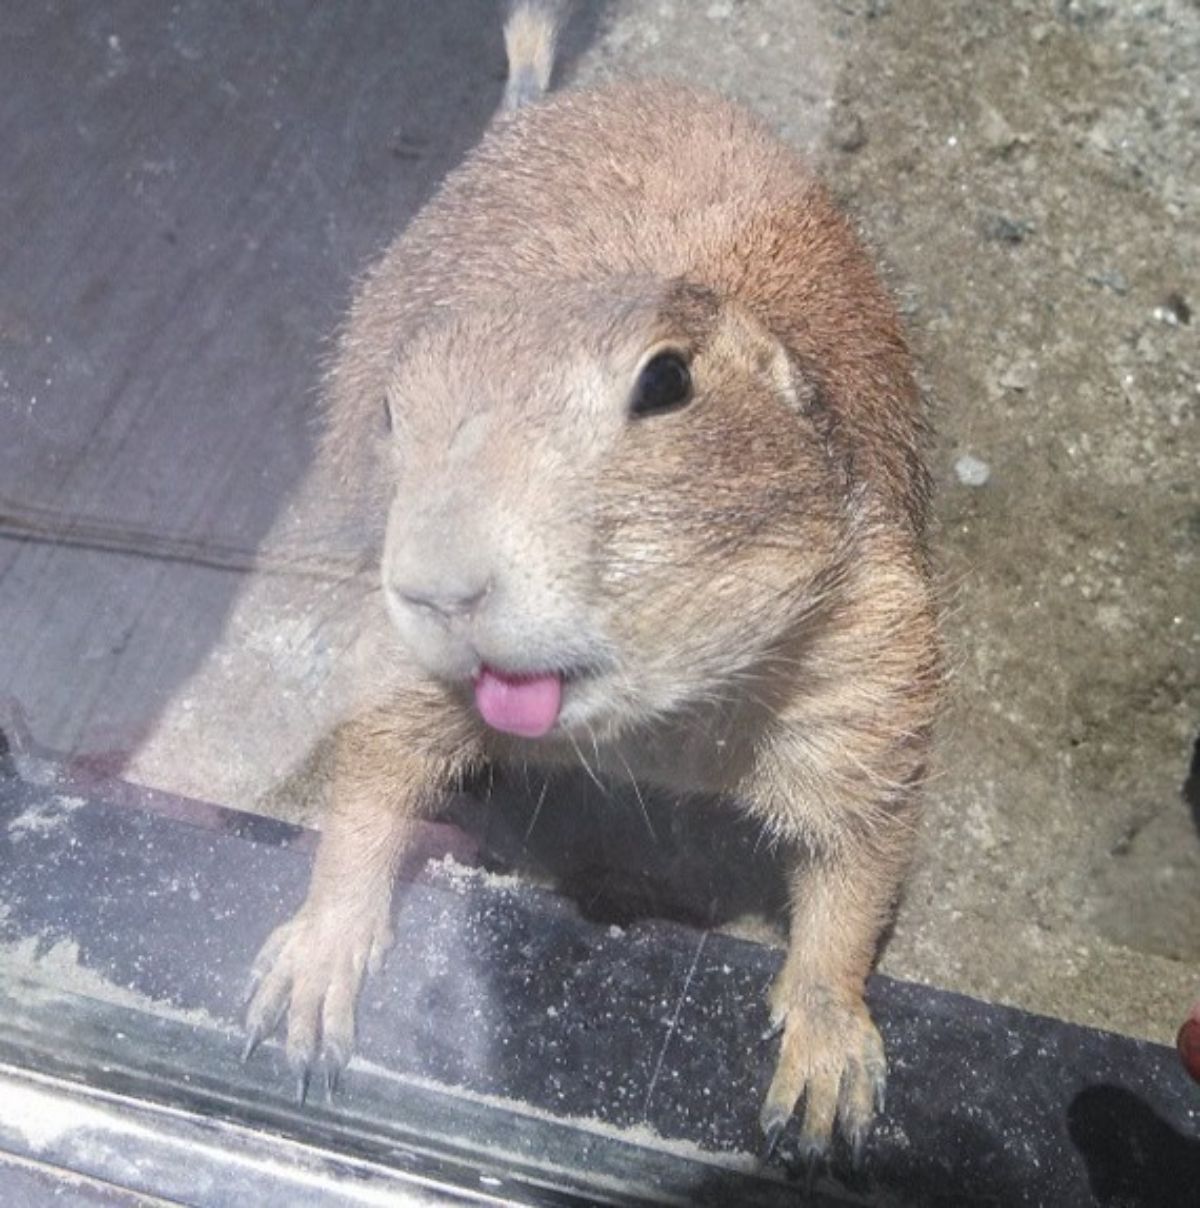 small rodent licking a glass